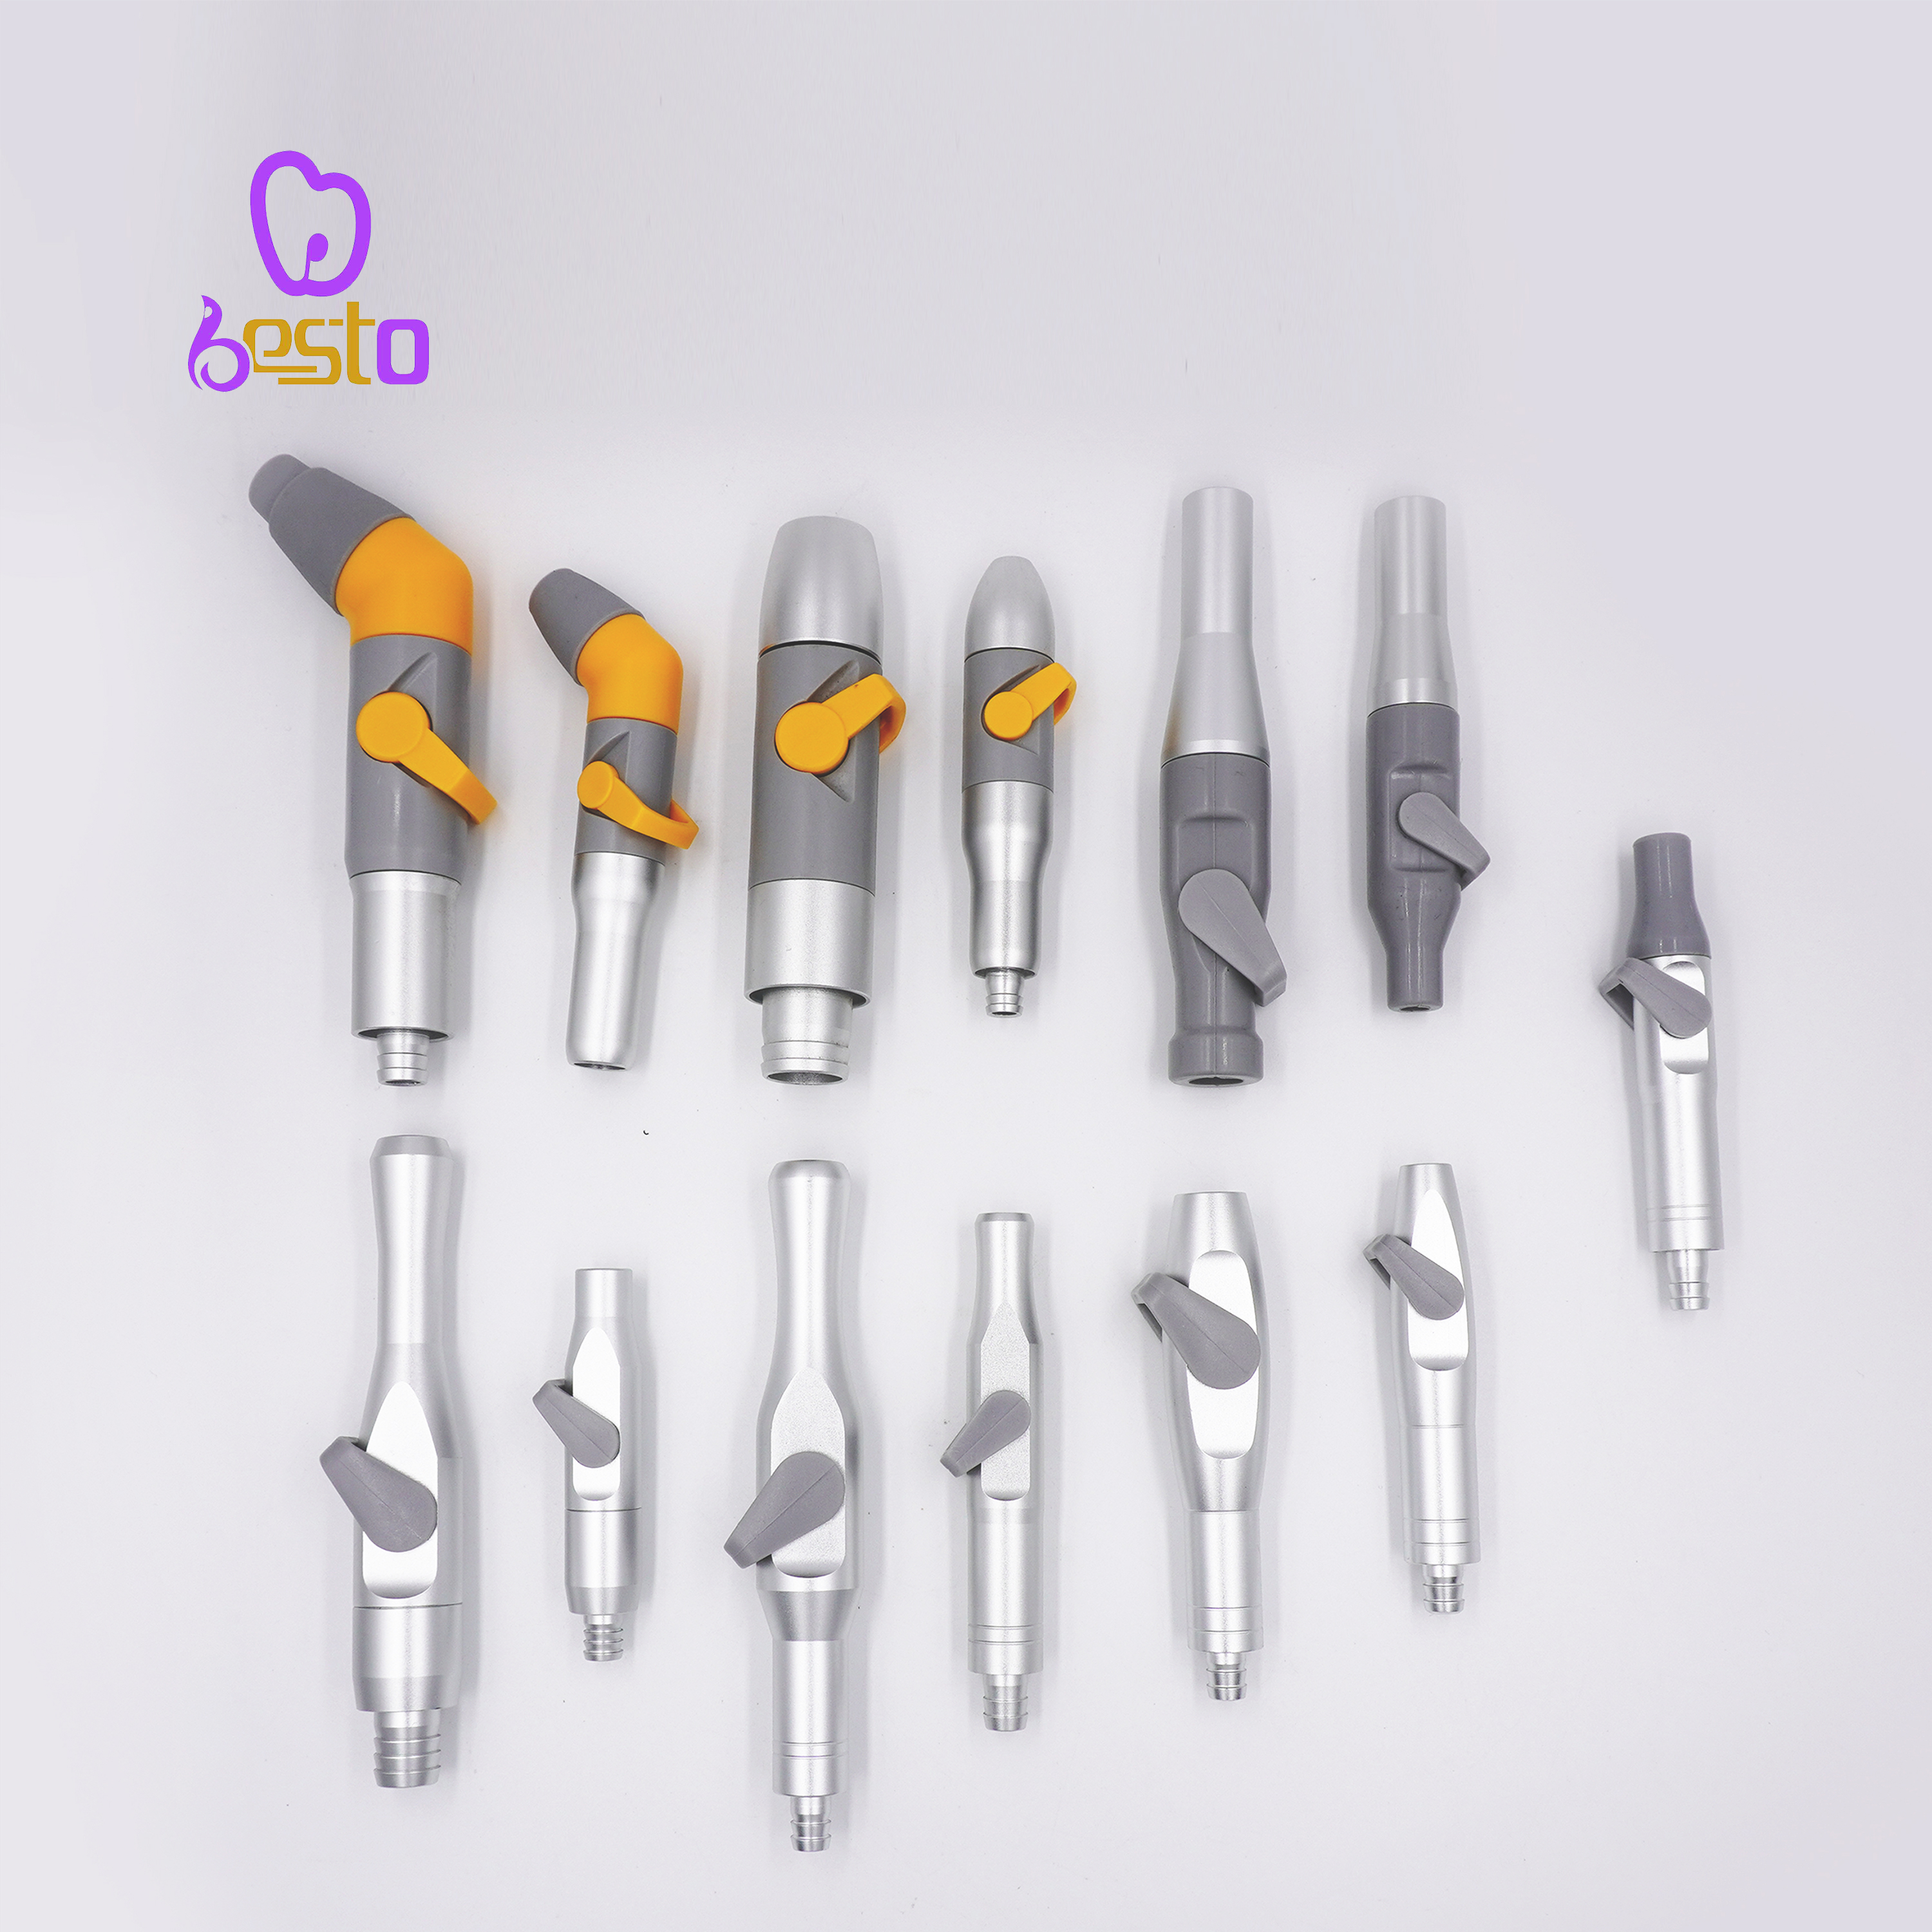 dental strong suction weak suction handpiece adaptaer plastic and metal dental chair accessories dental materials 